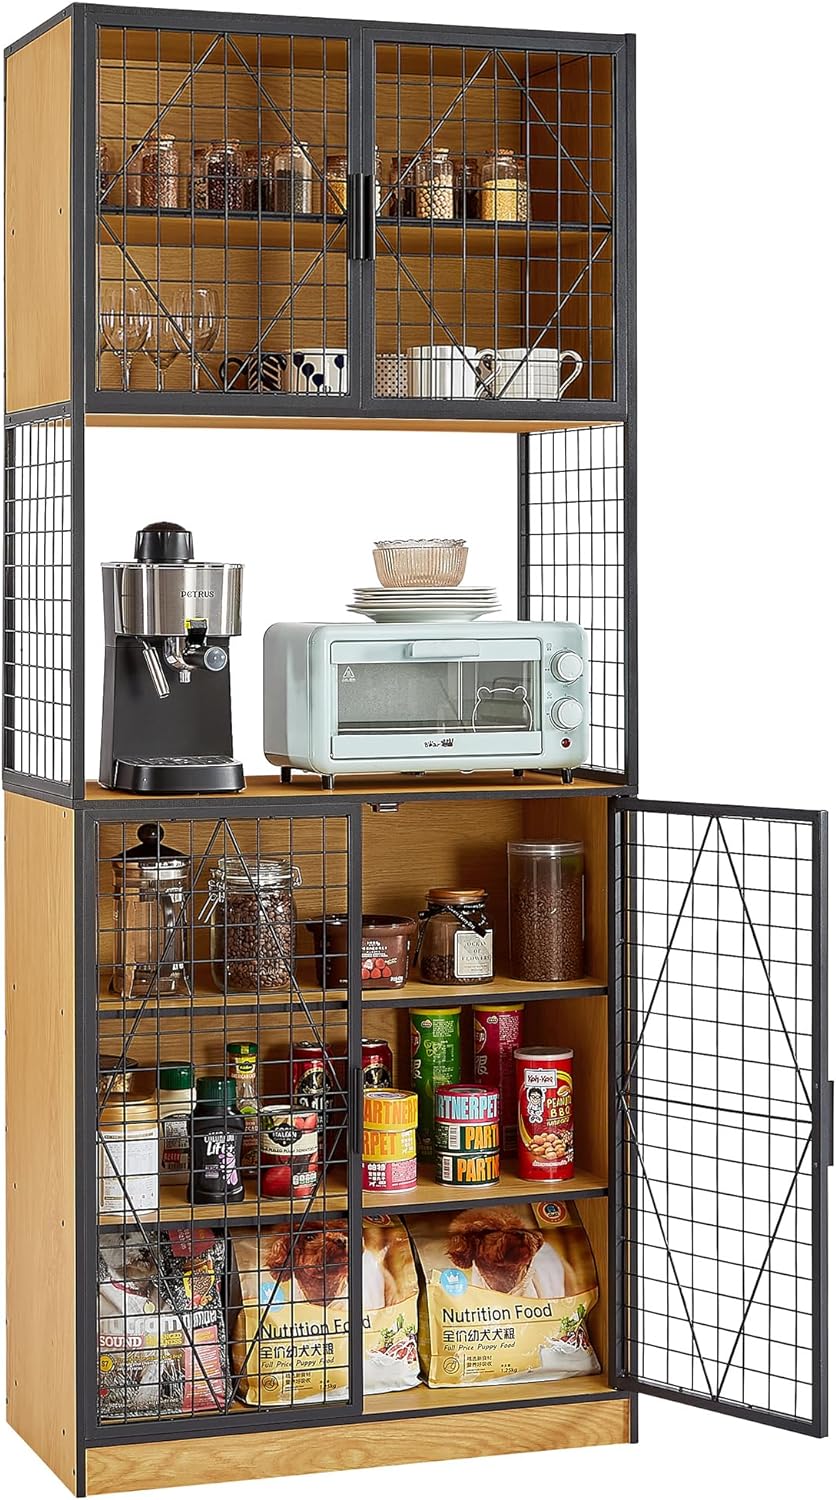  Kitchen Storage Cabinets Kitchen Bakers Racks with Storage  Holder on Wheel Table Microwave Oven Stand Storage Cart with Wire Basket  Metal Frame Utility Kitchen Shelves Kitchen Shelves ( Color : Gold , 